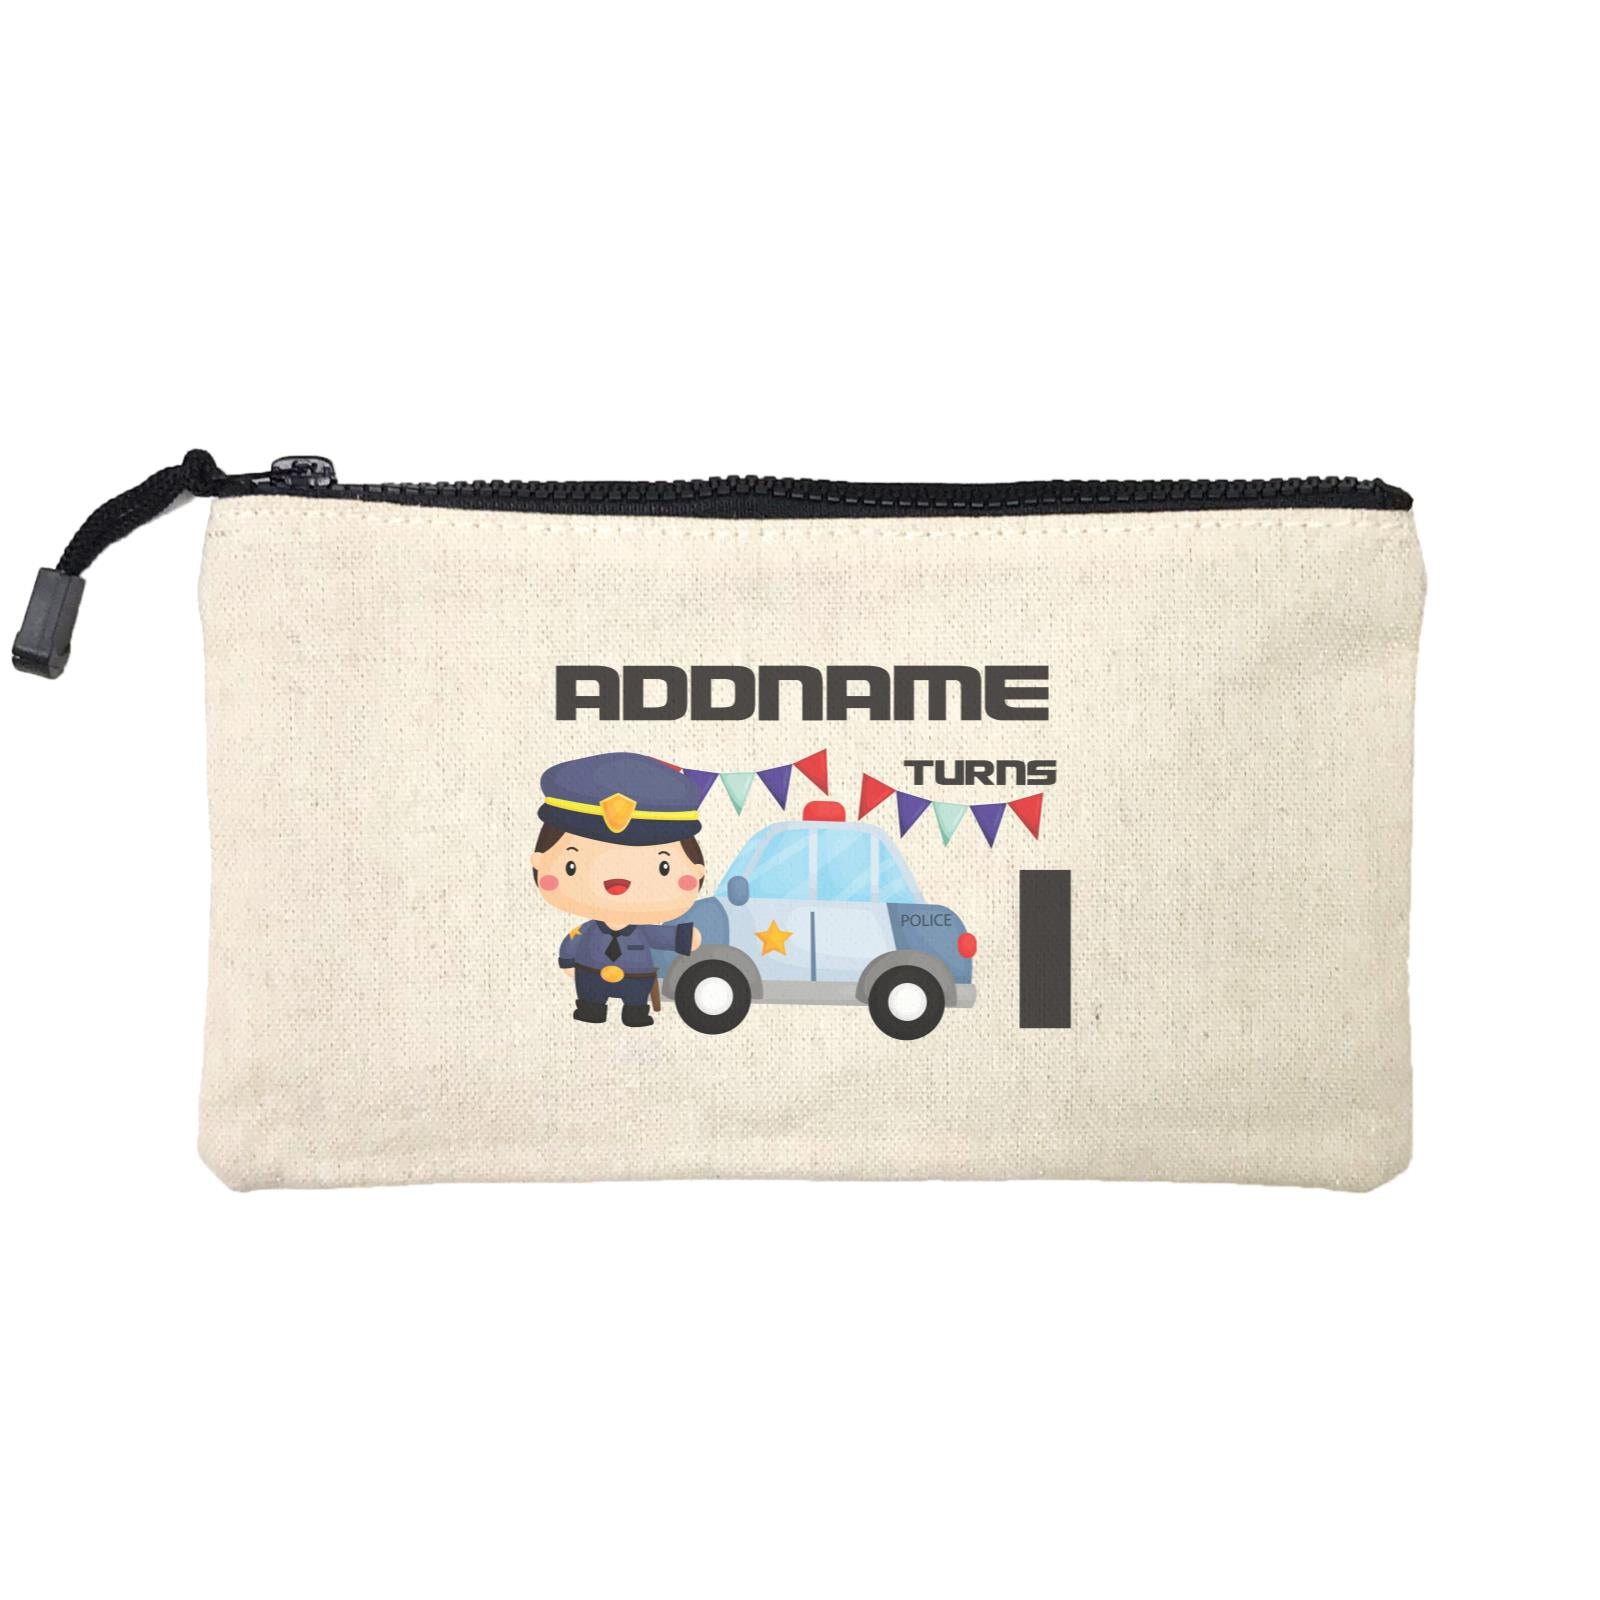 Birthday Police Officer Boy In Suit With Police Car Addname Turns 1 Mini Accessories Stationery Pouch